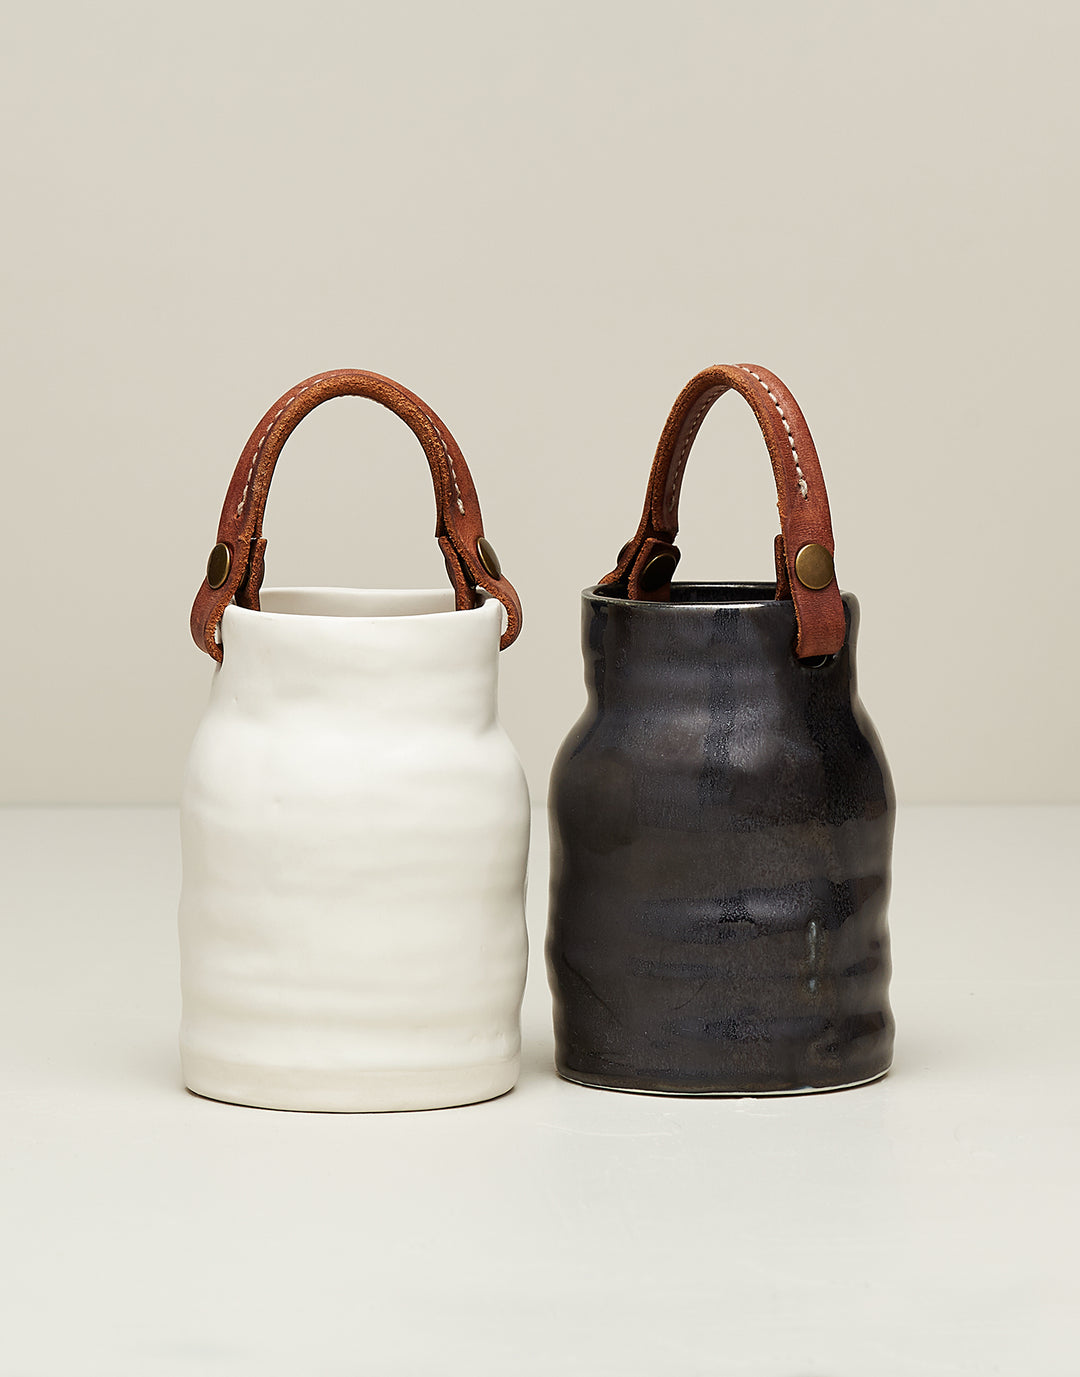 DBO HOME Handmade black and white ceramic utility vessels with hand stitched leather handles